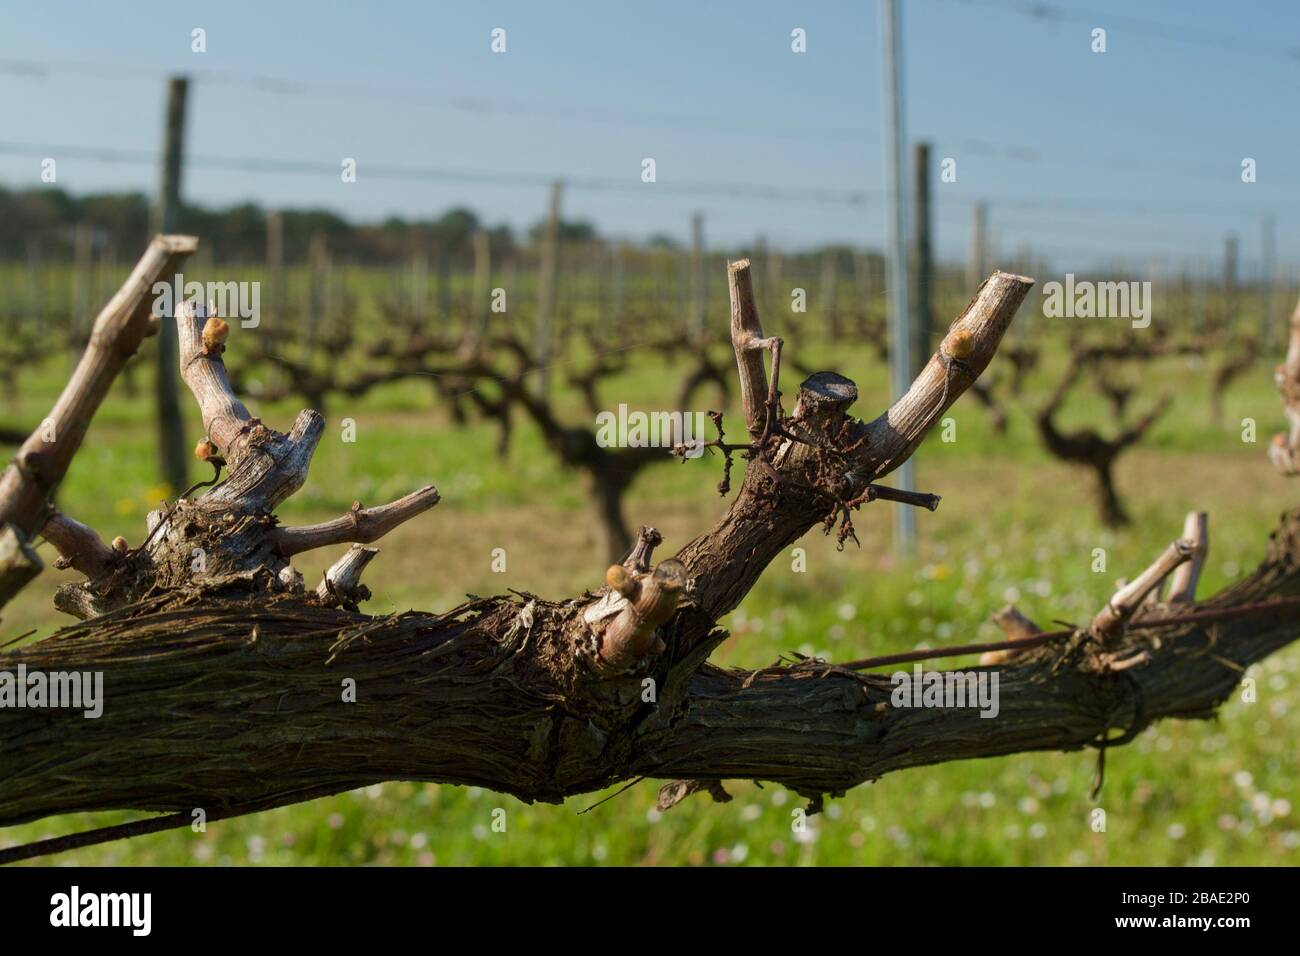 New shoots on vines in early spring in a vineyard in the Cotes de Duras AOC, France. Stock Photo